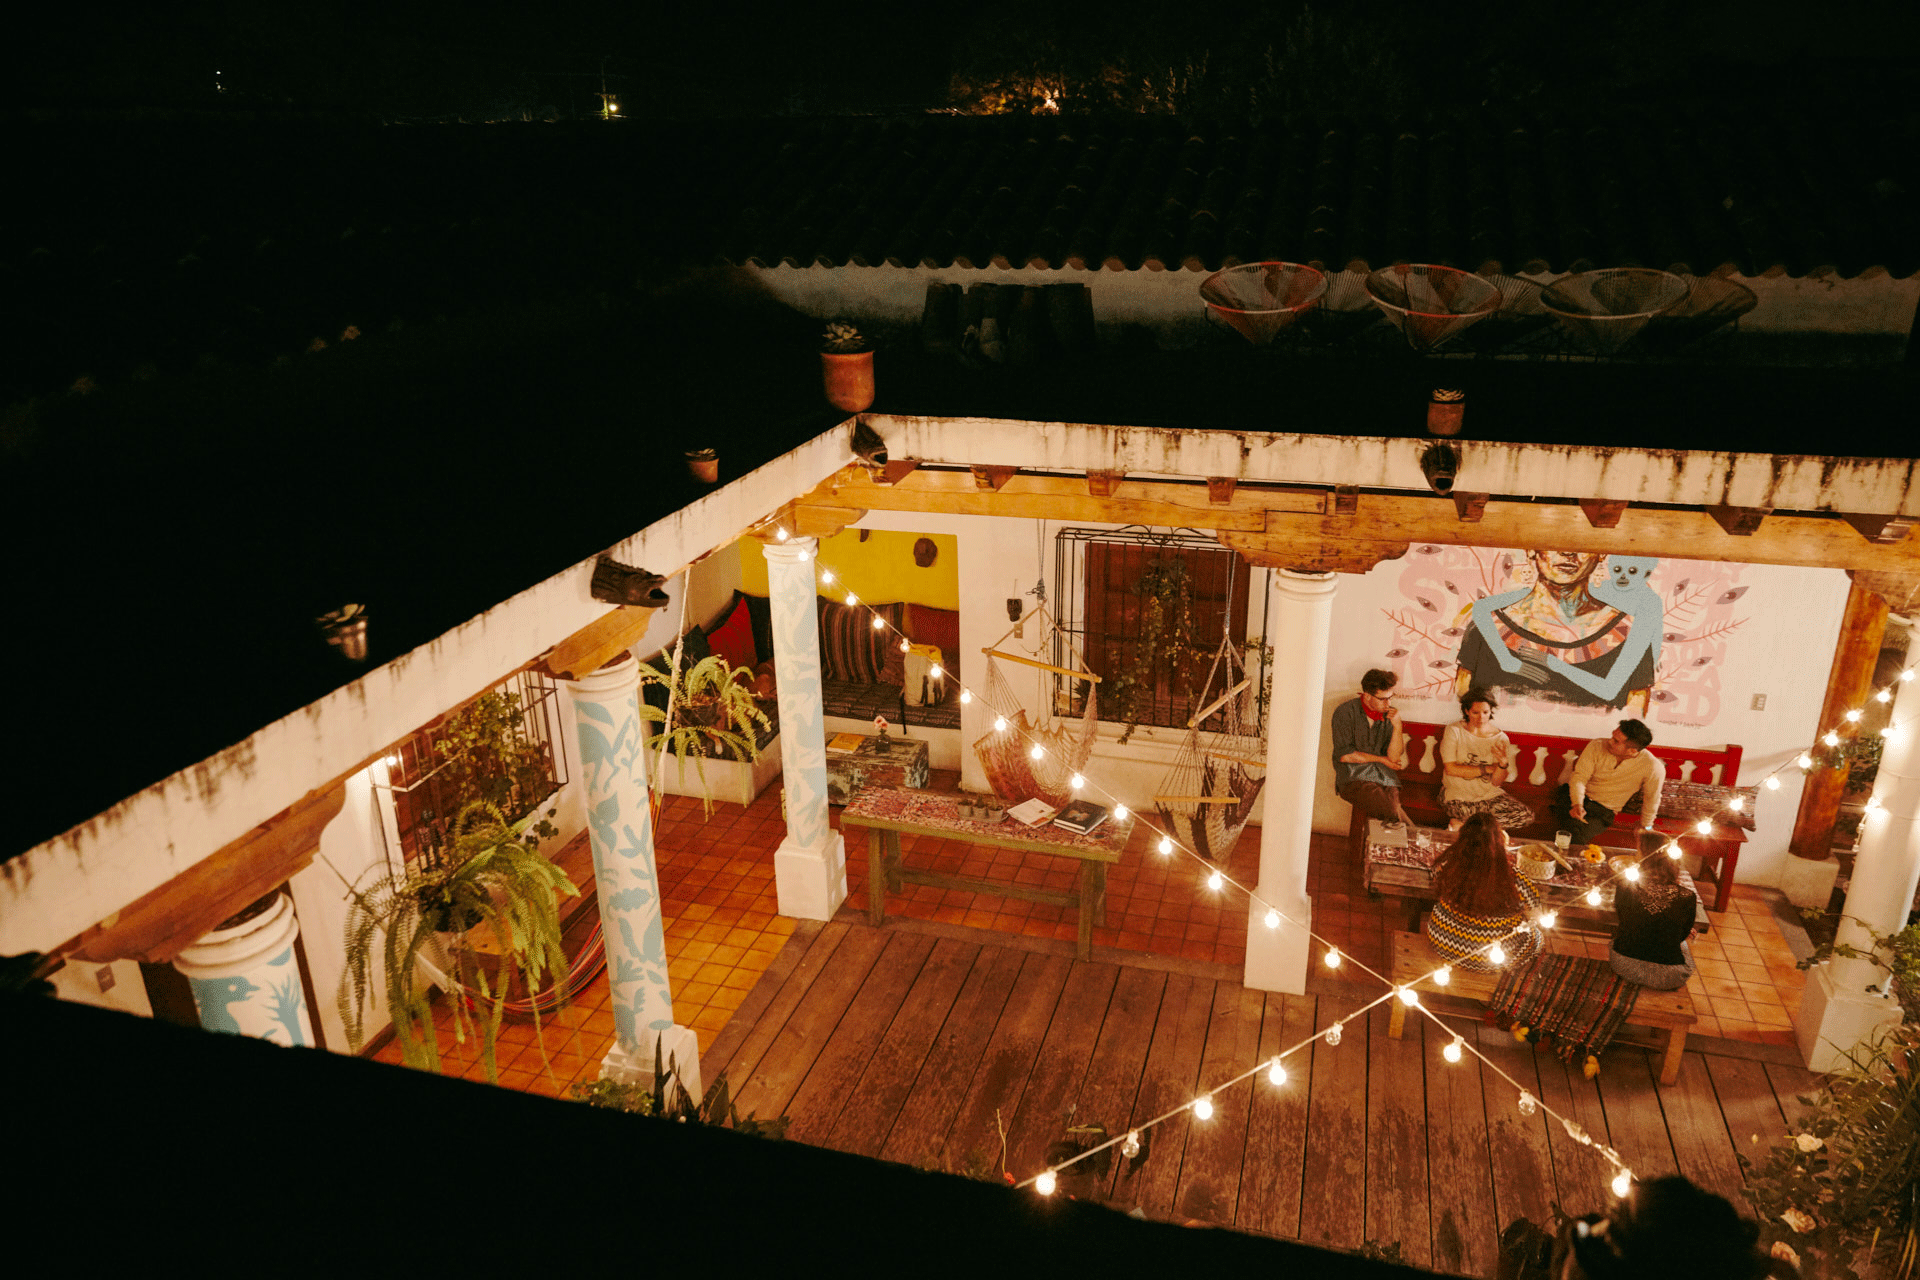 An overhead shot of a small group of people conversing in a courtyard strung with twinkle lights.